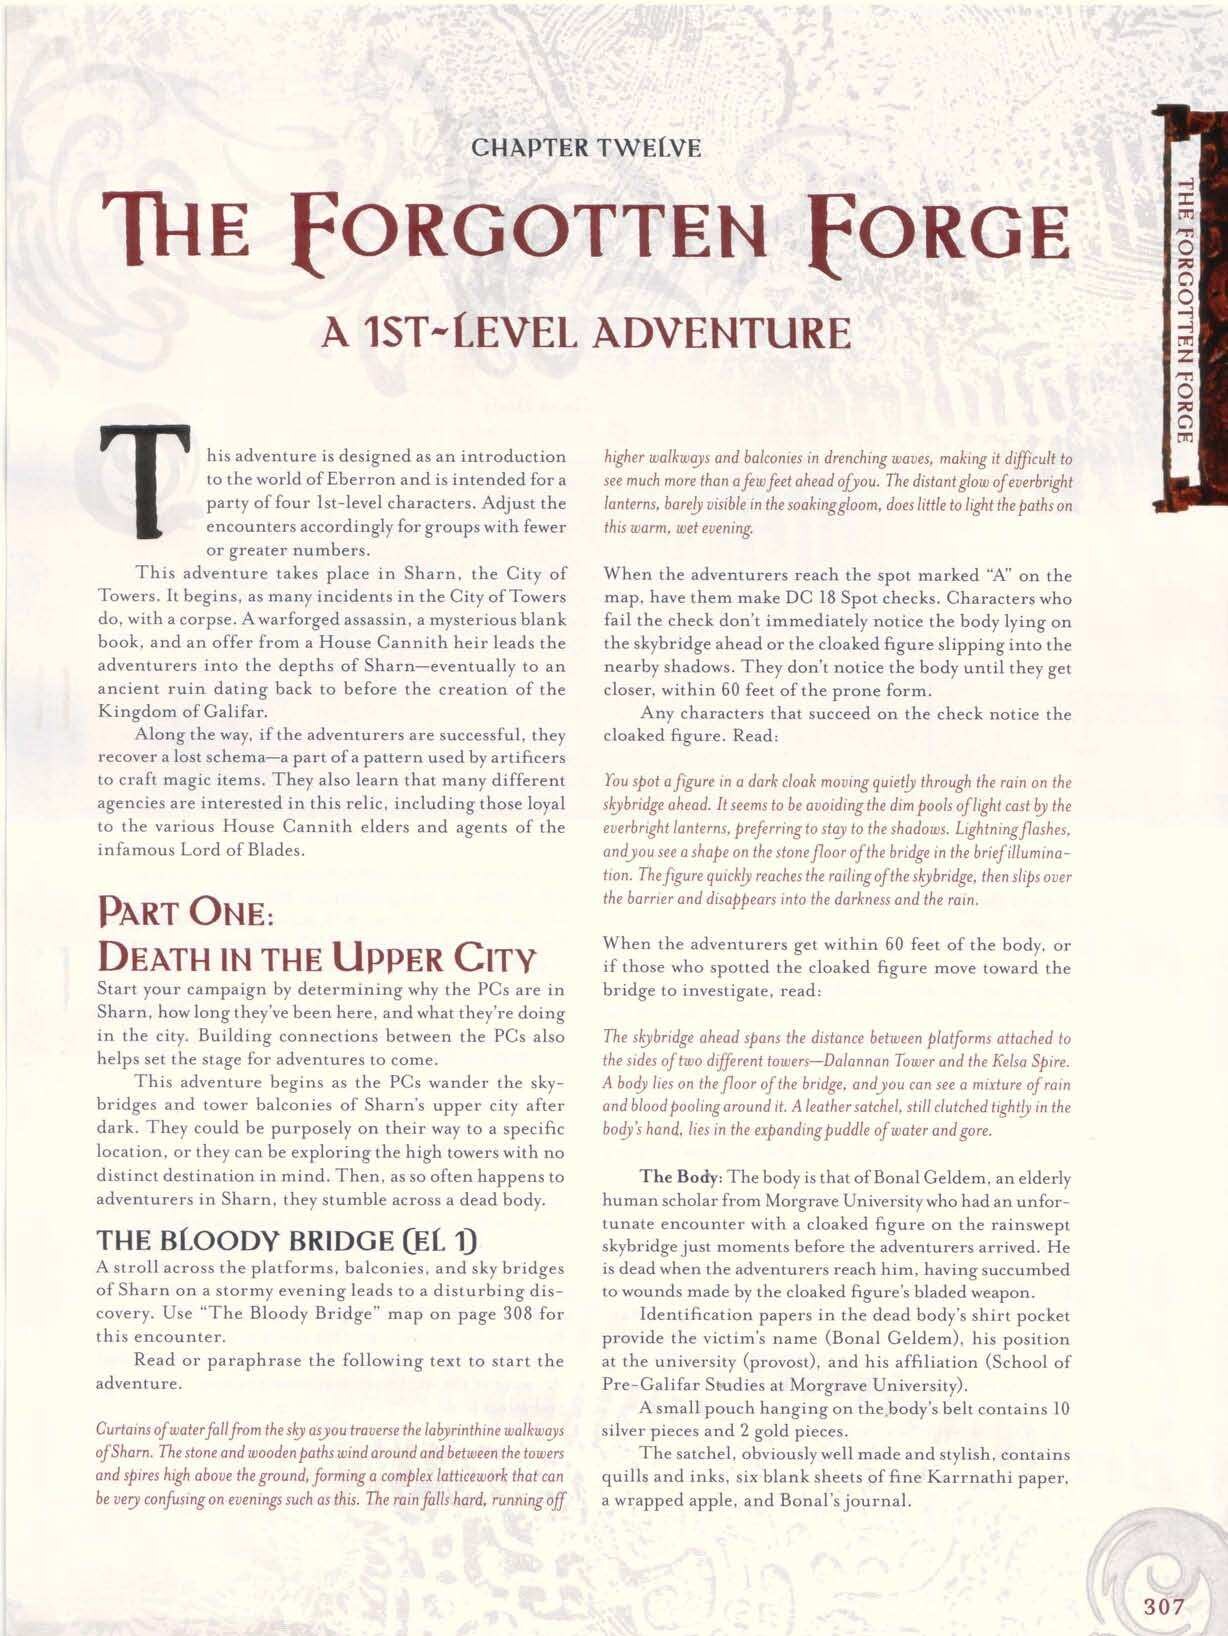 The Forgotten Forge